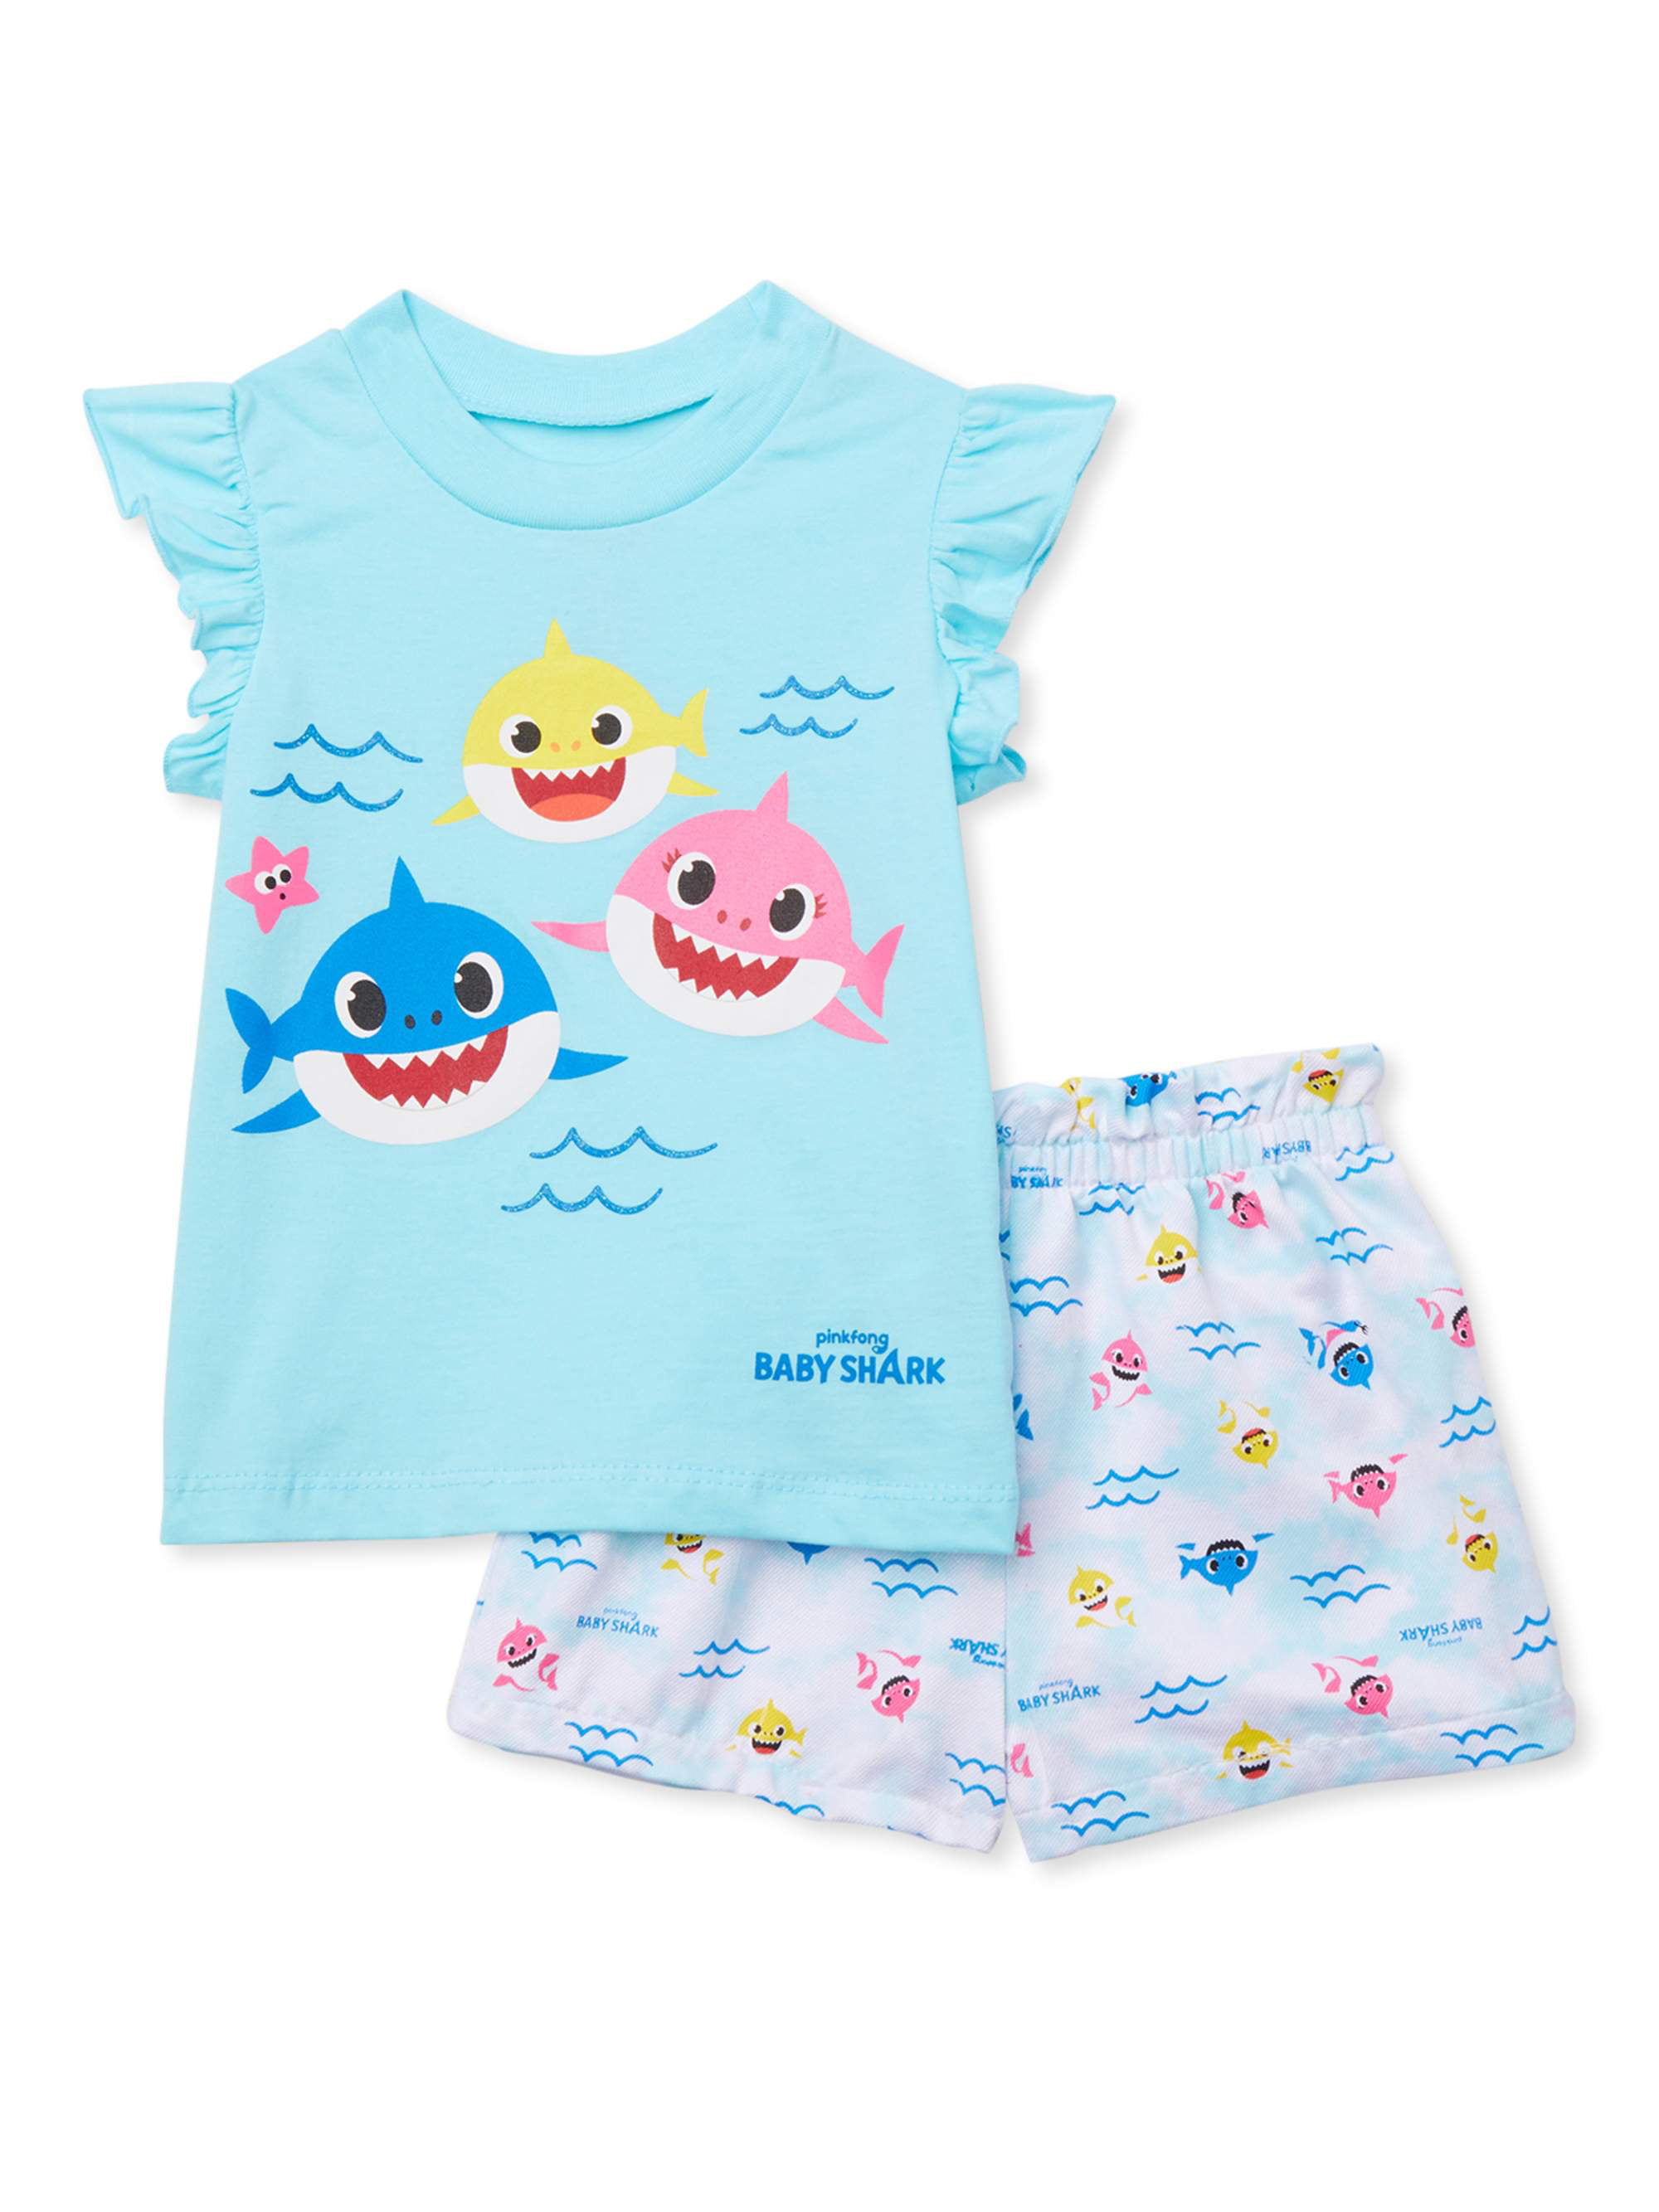 baby shark outfit for baby girl